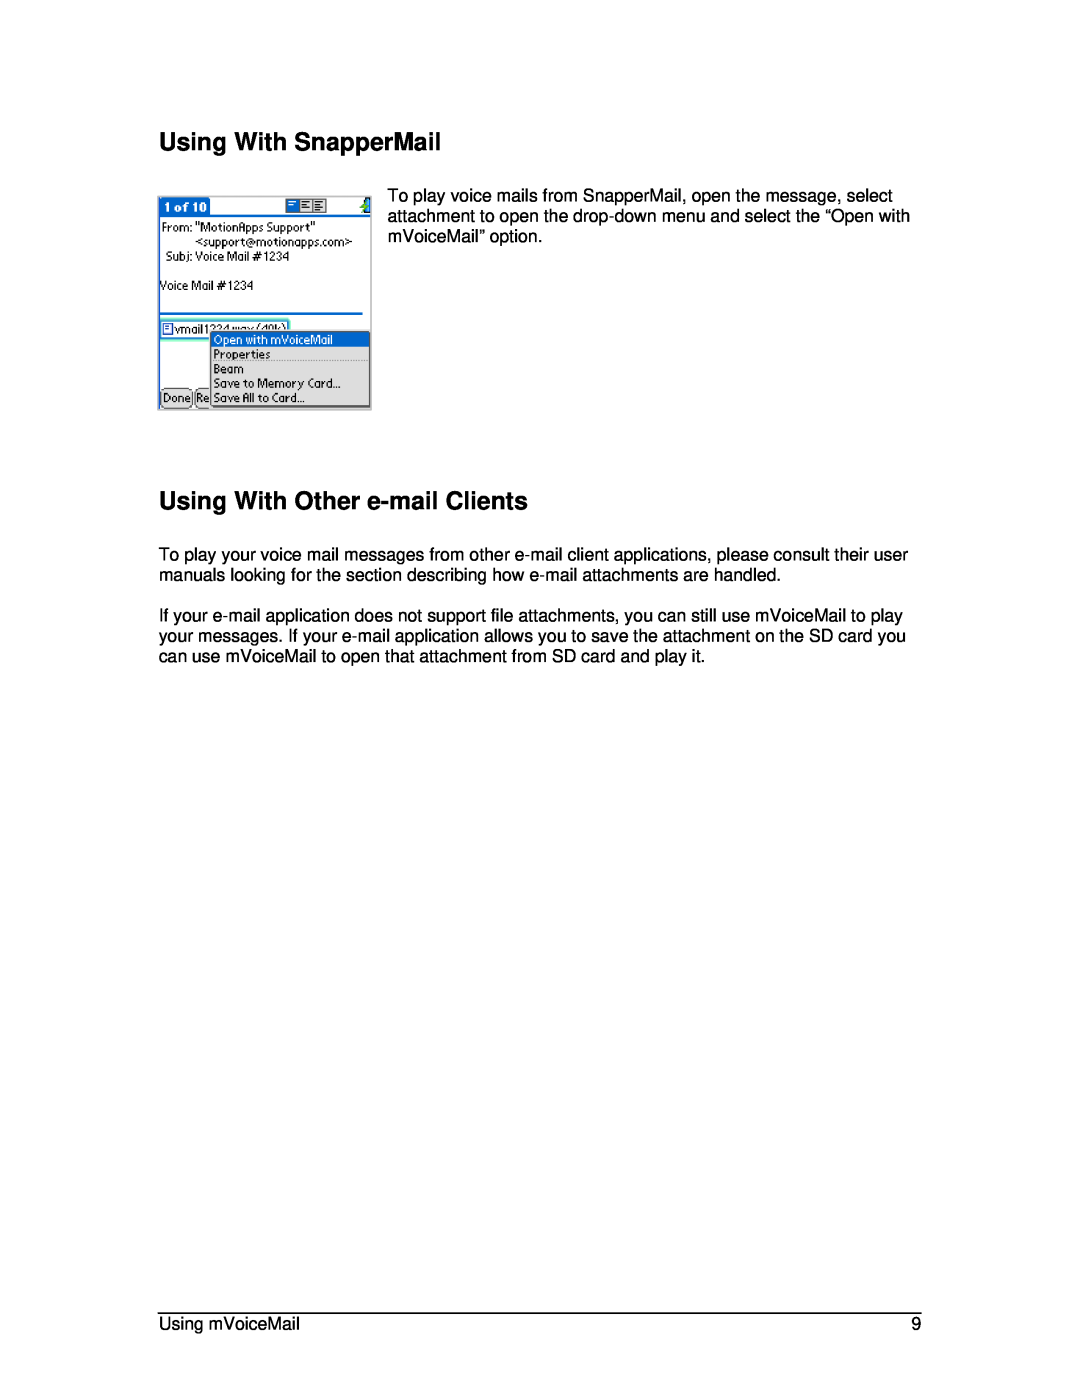 Motorola motorola user manual Using With SnapperMail, Using With Other e-mailClients 